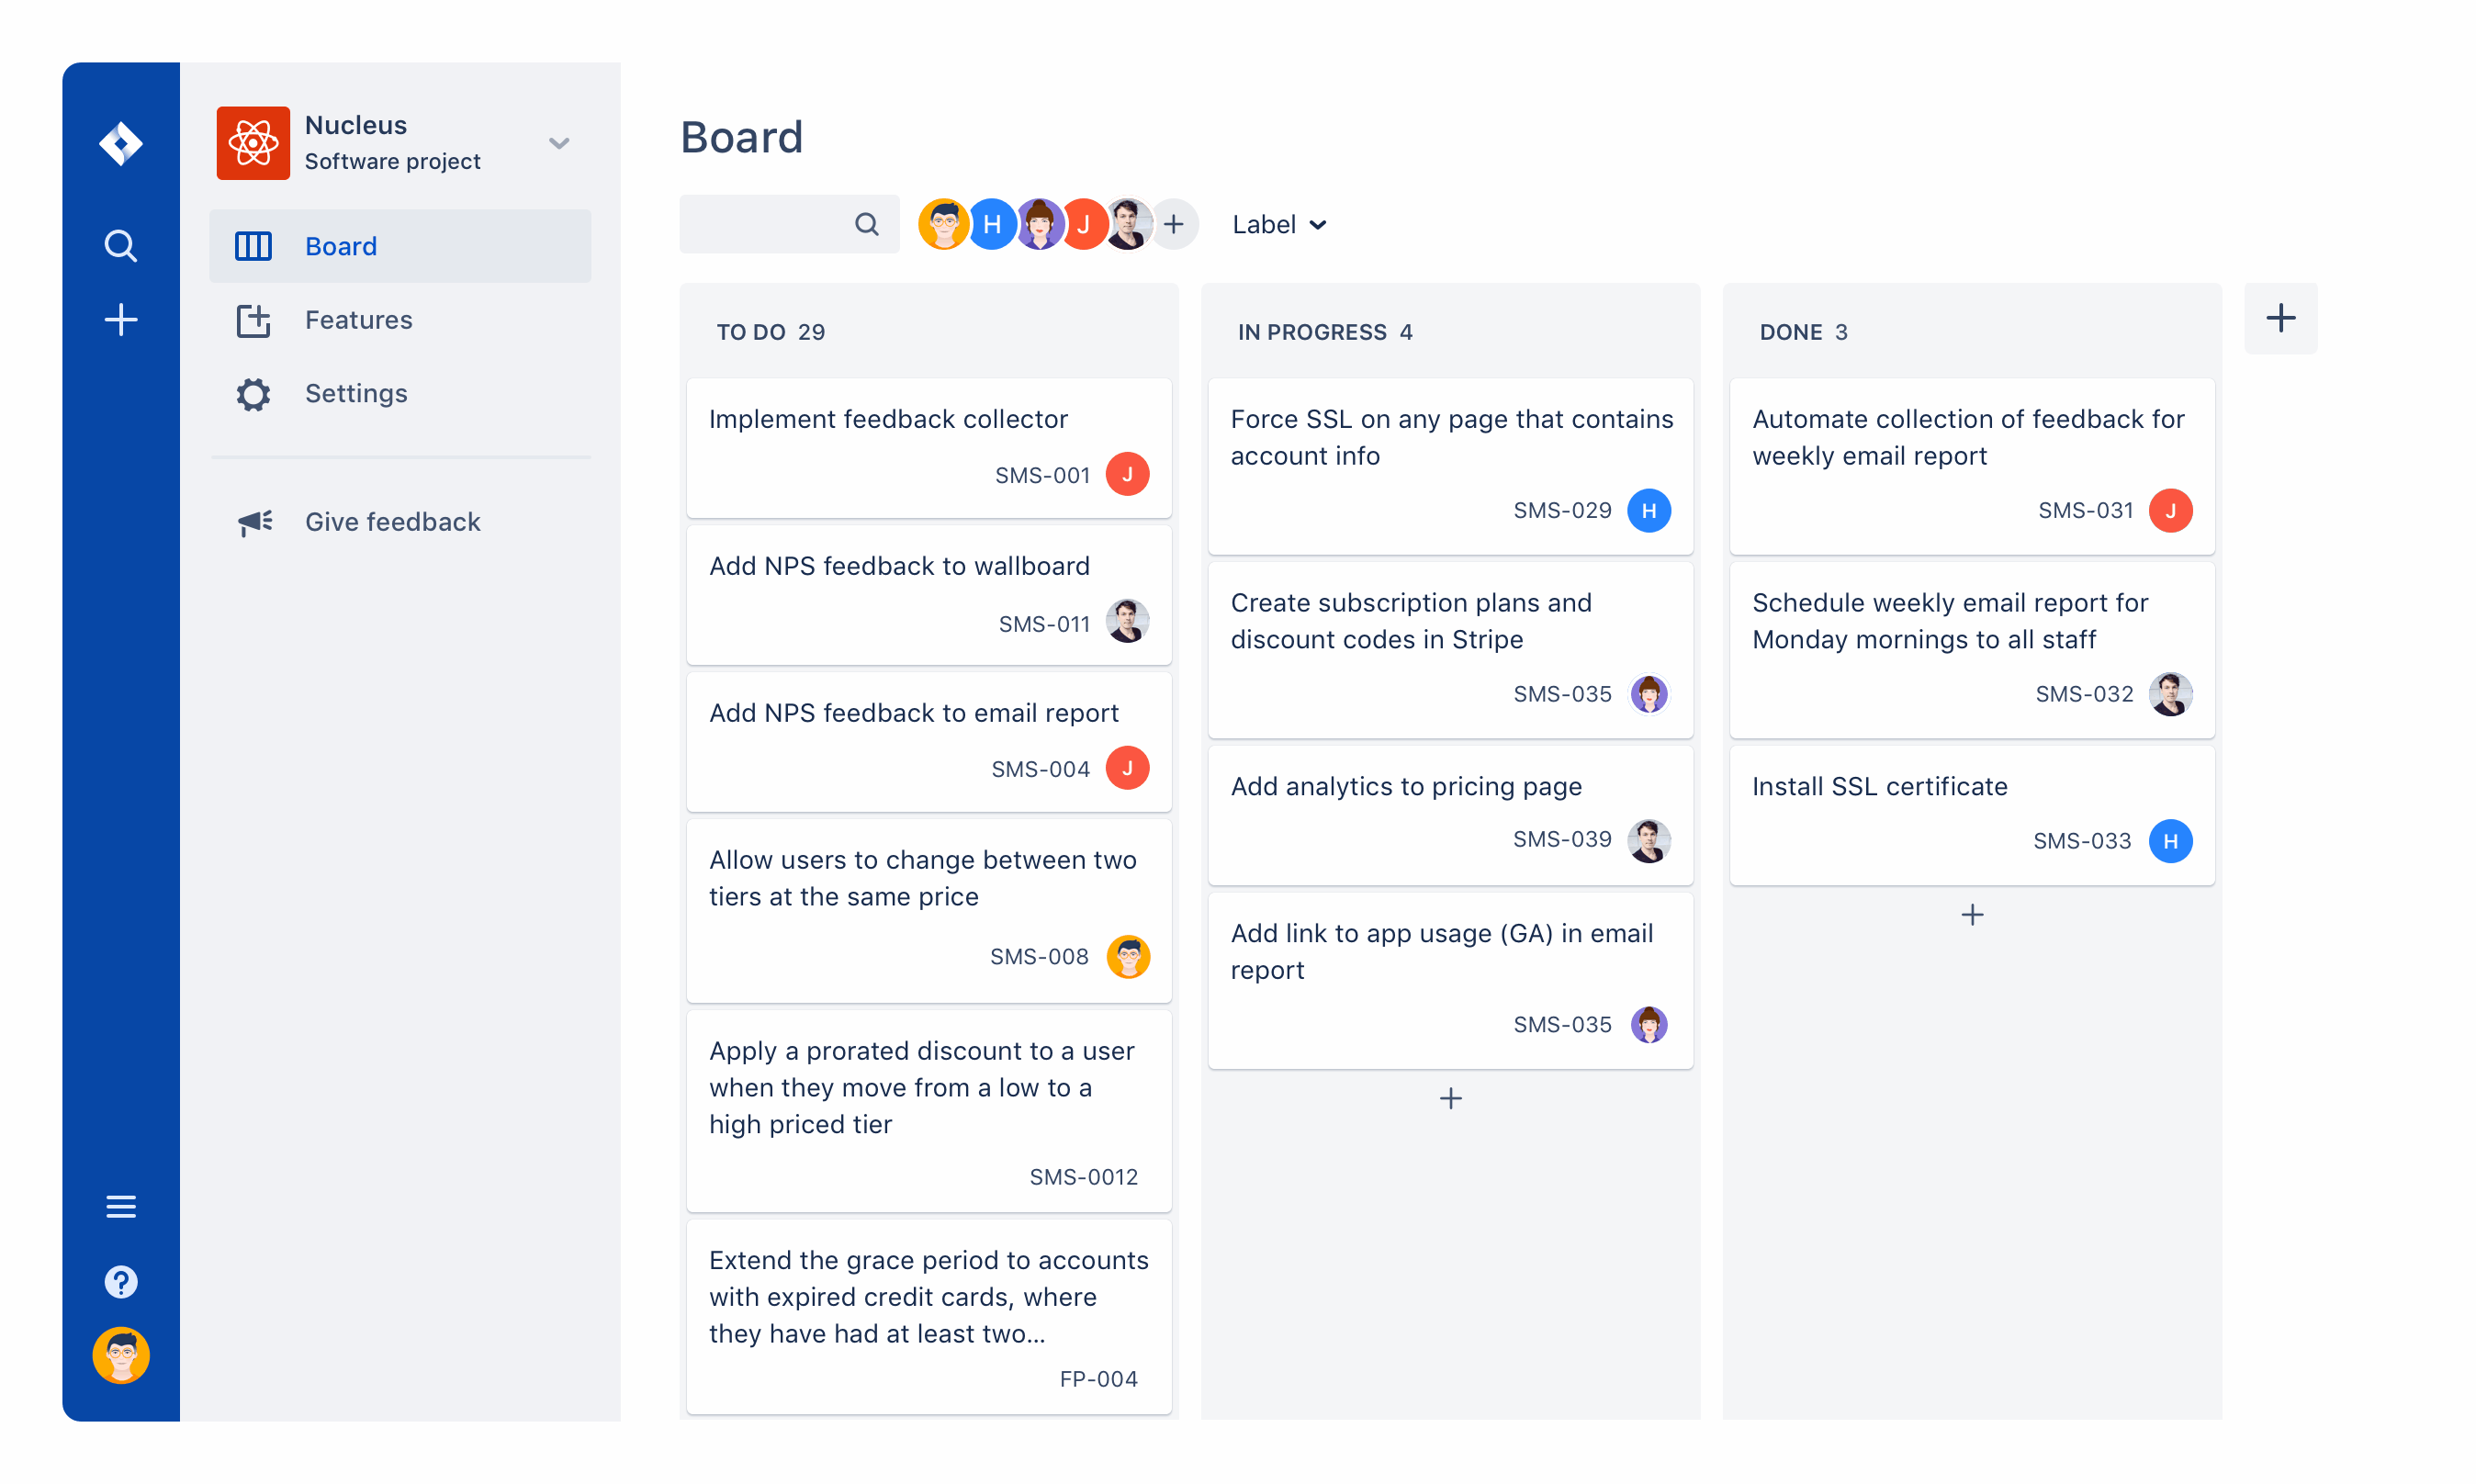 Animation of Jira's new agile boards in action